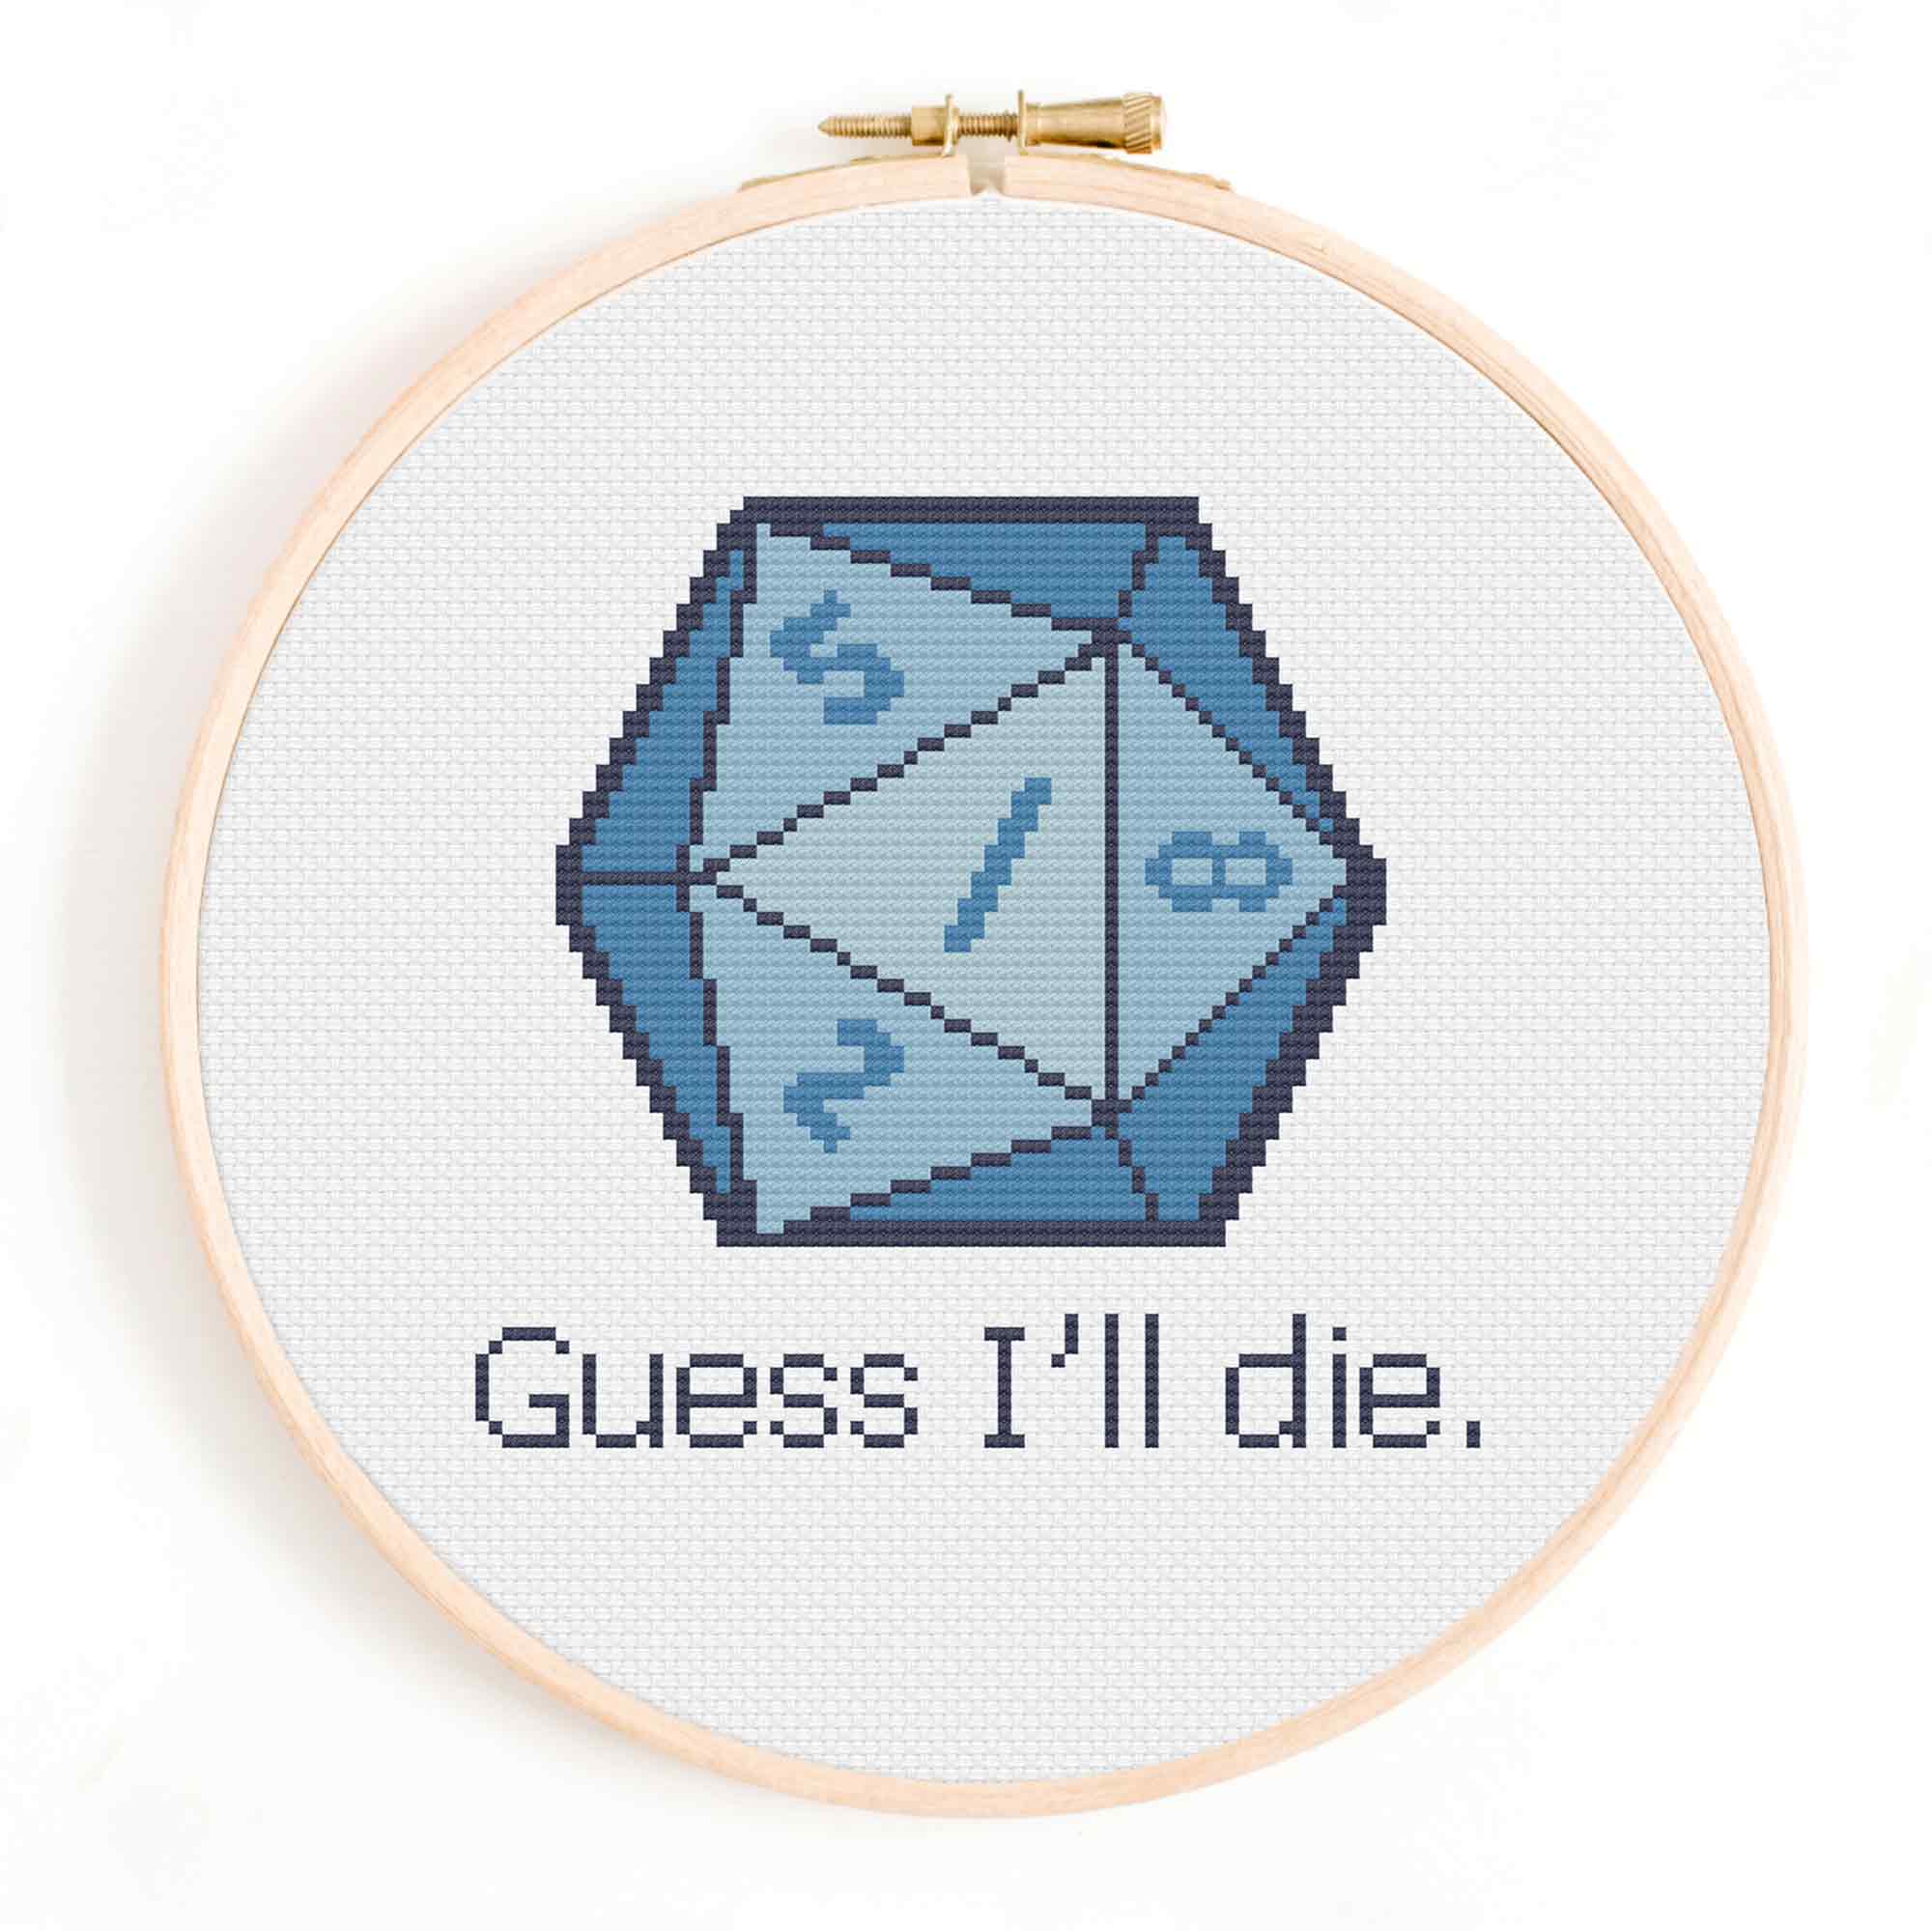 'Guess I'll Die' Dungeons and Dragons Cross Stitch Pattern